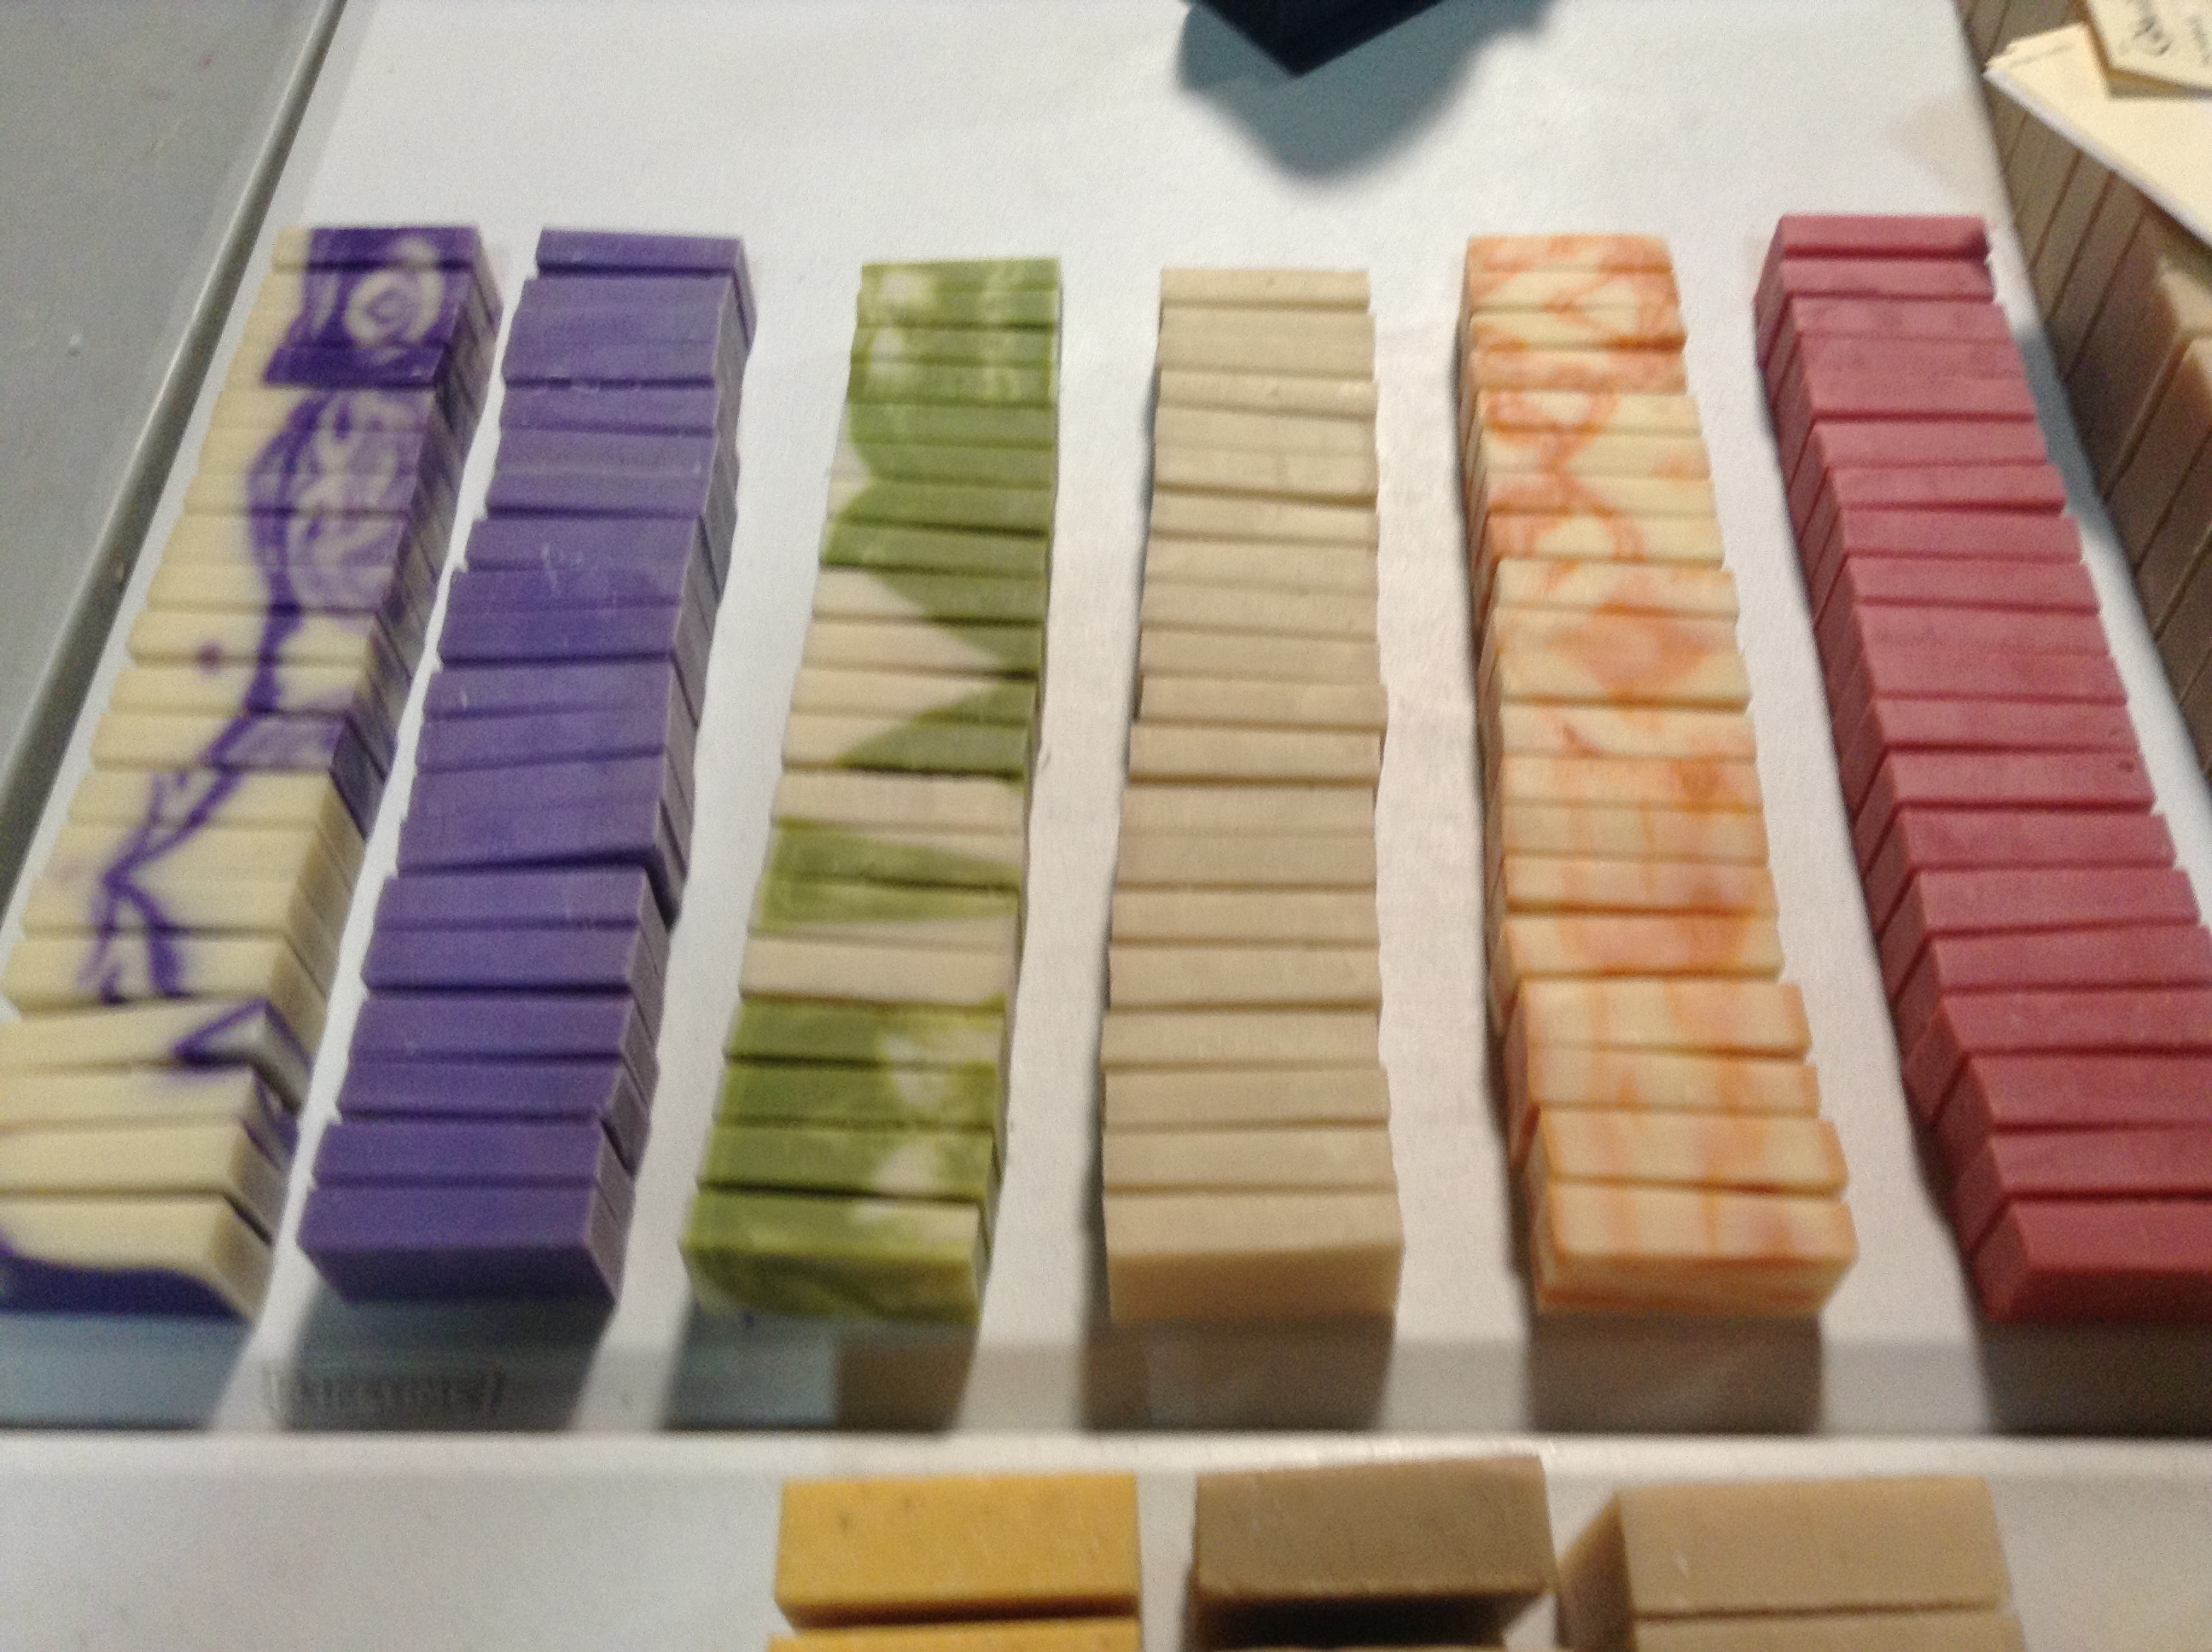 small soaps